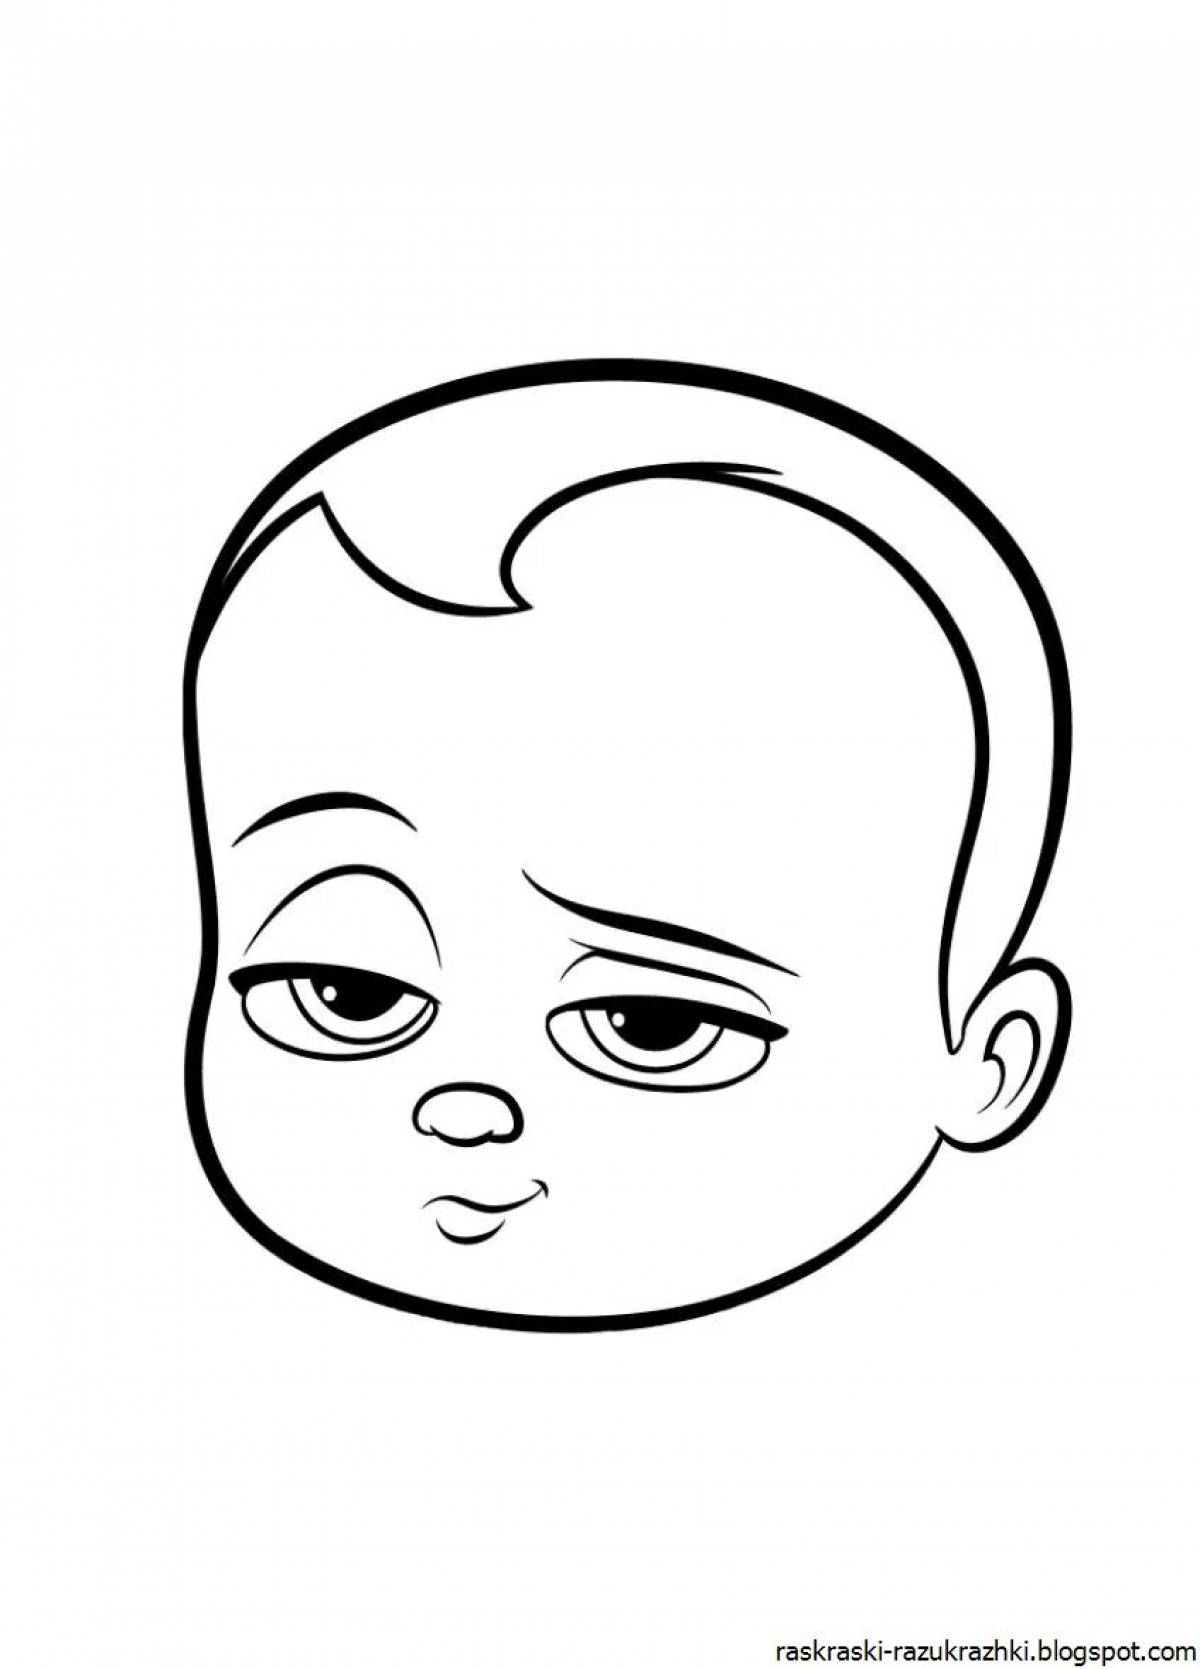 Playful baby face coloring page for kids